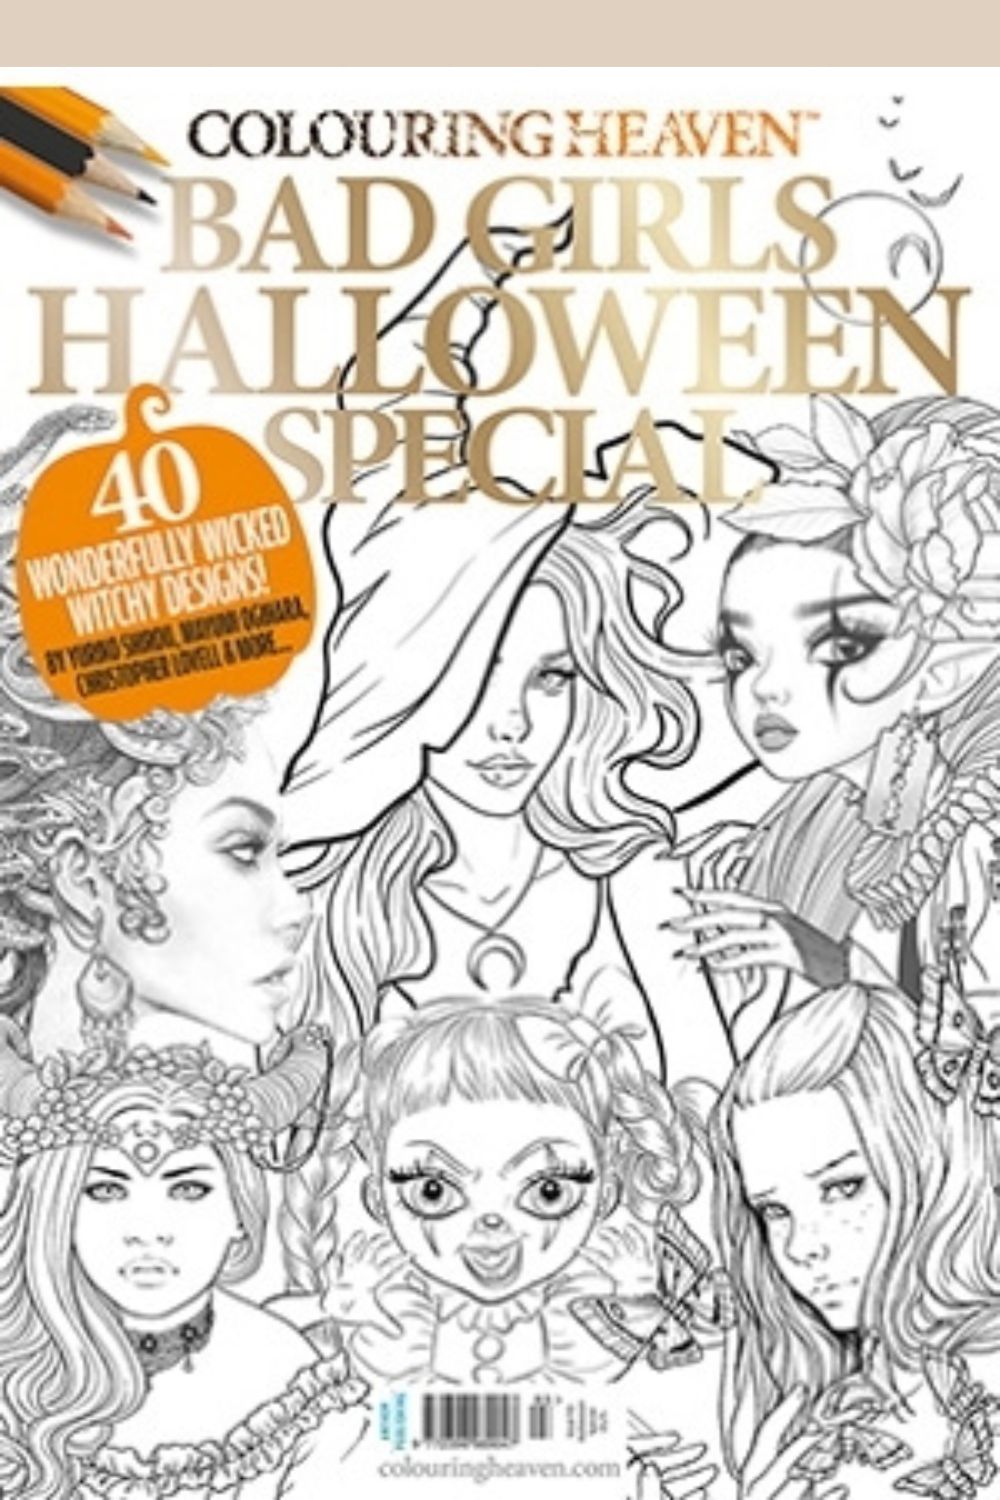 Colouring Heaven #93 Bad Girls Halloween Special